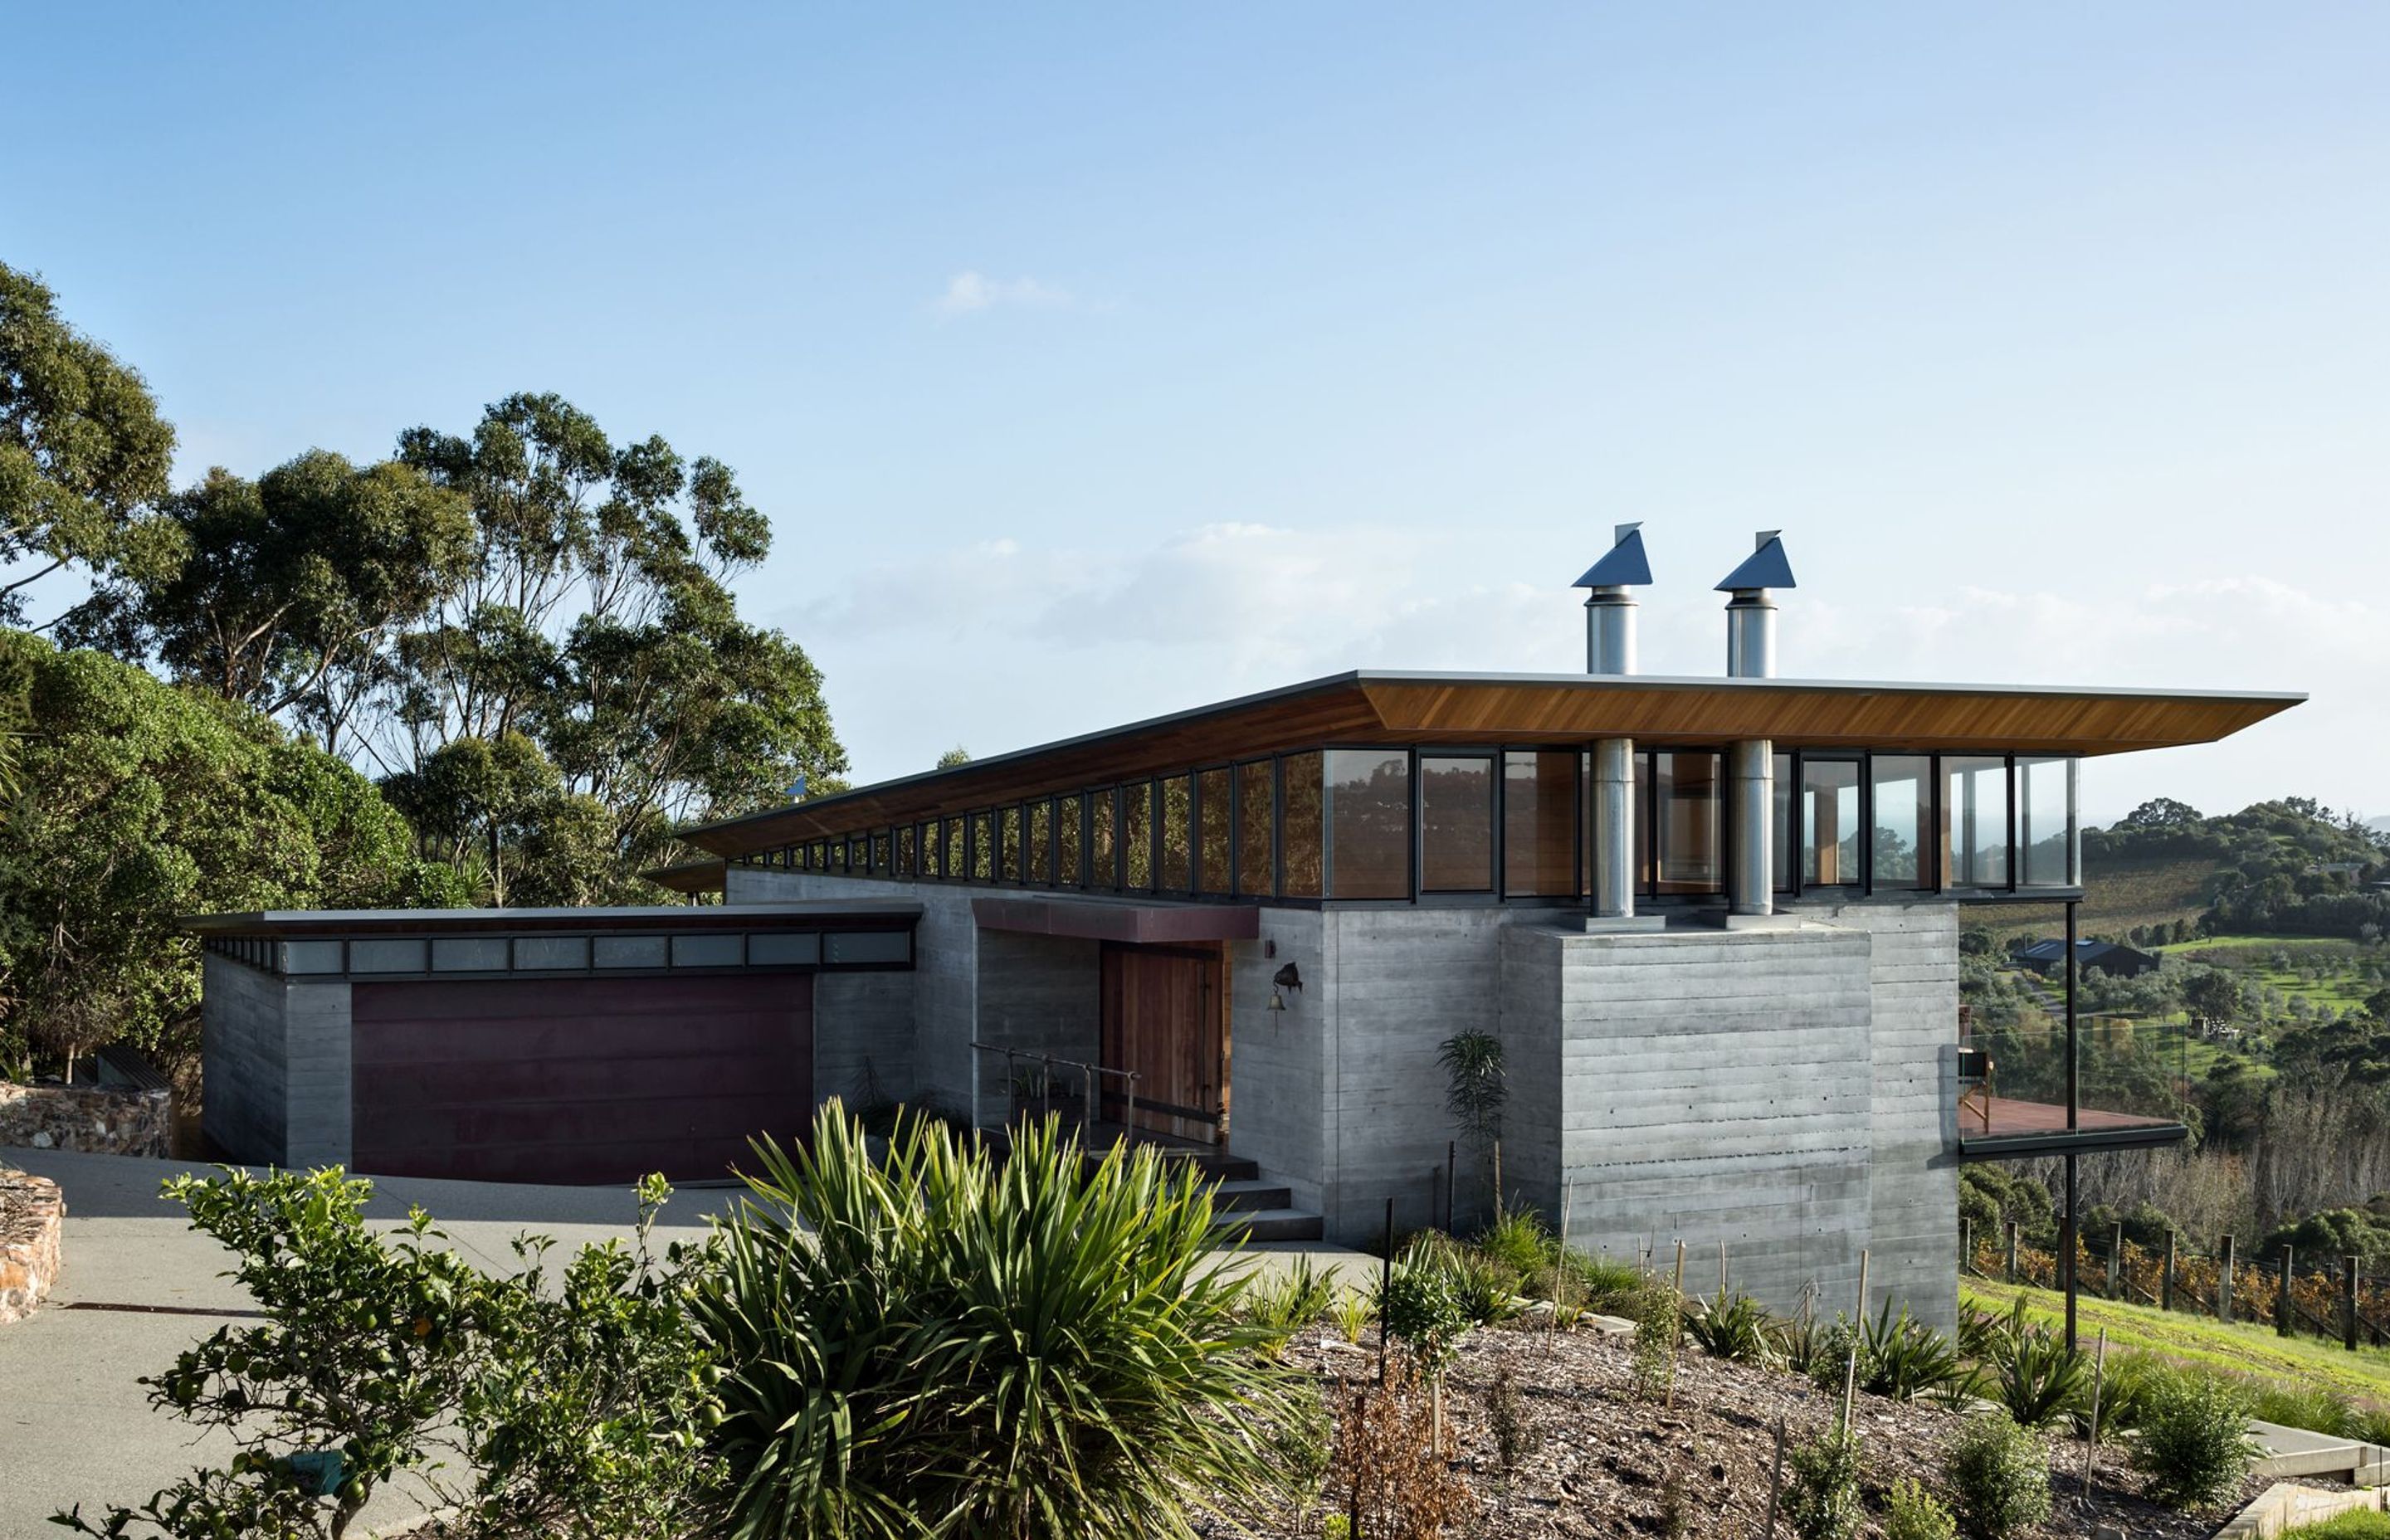 Oneroa House is partly built on the foundations of a previous building, laid out to follow the contours of the land and with a sloping roof that appears to float over clerestory windows.